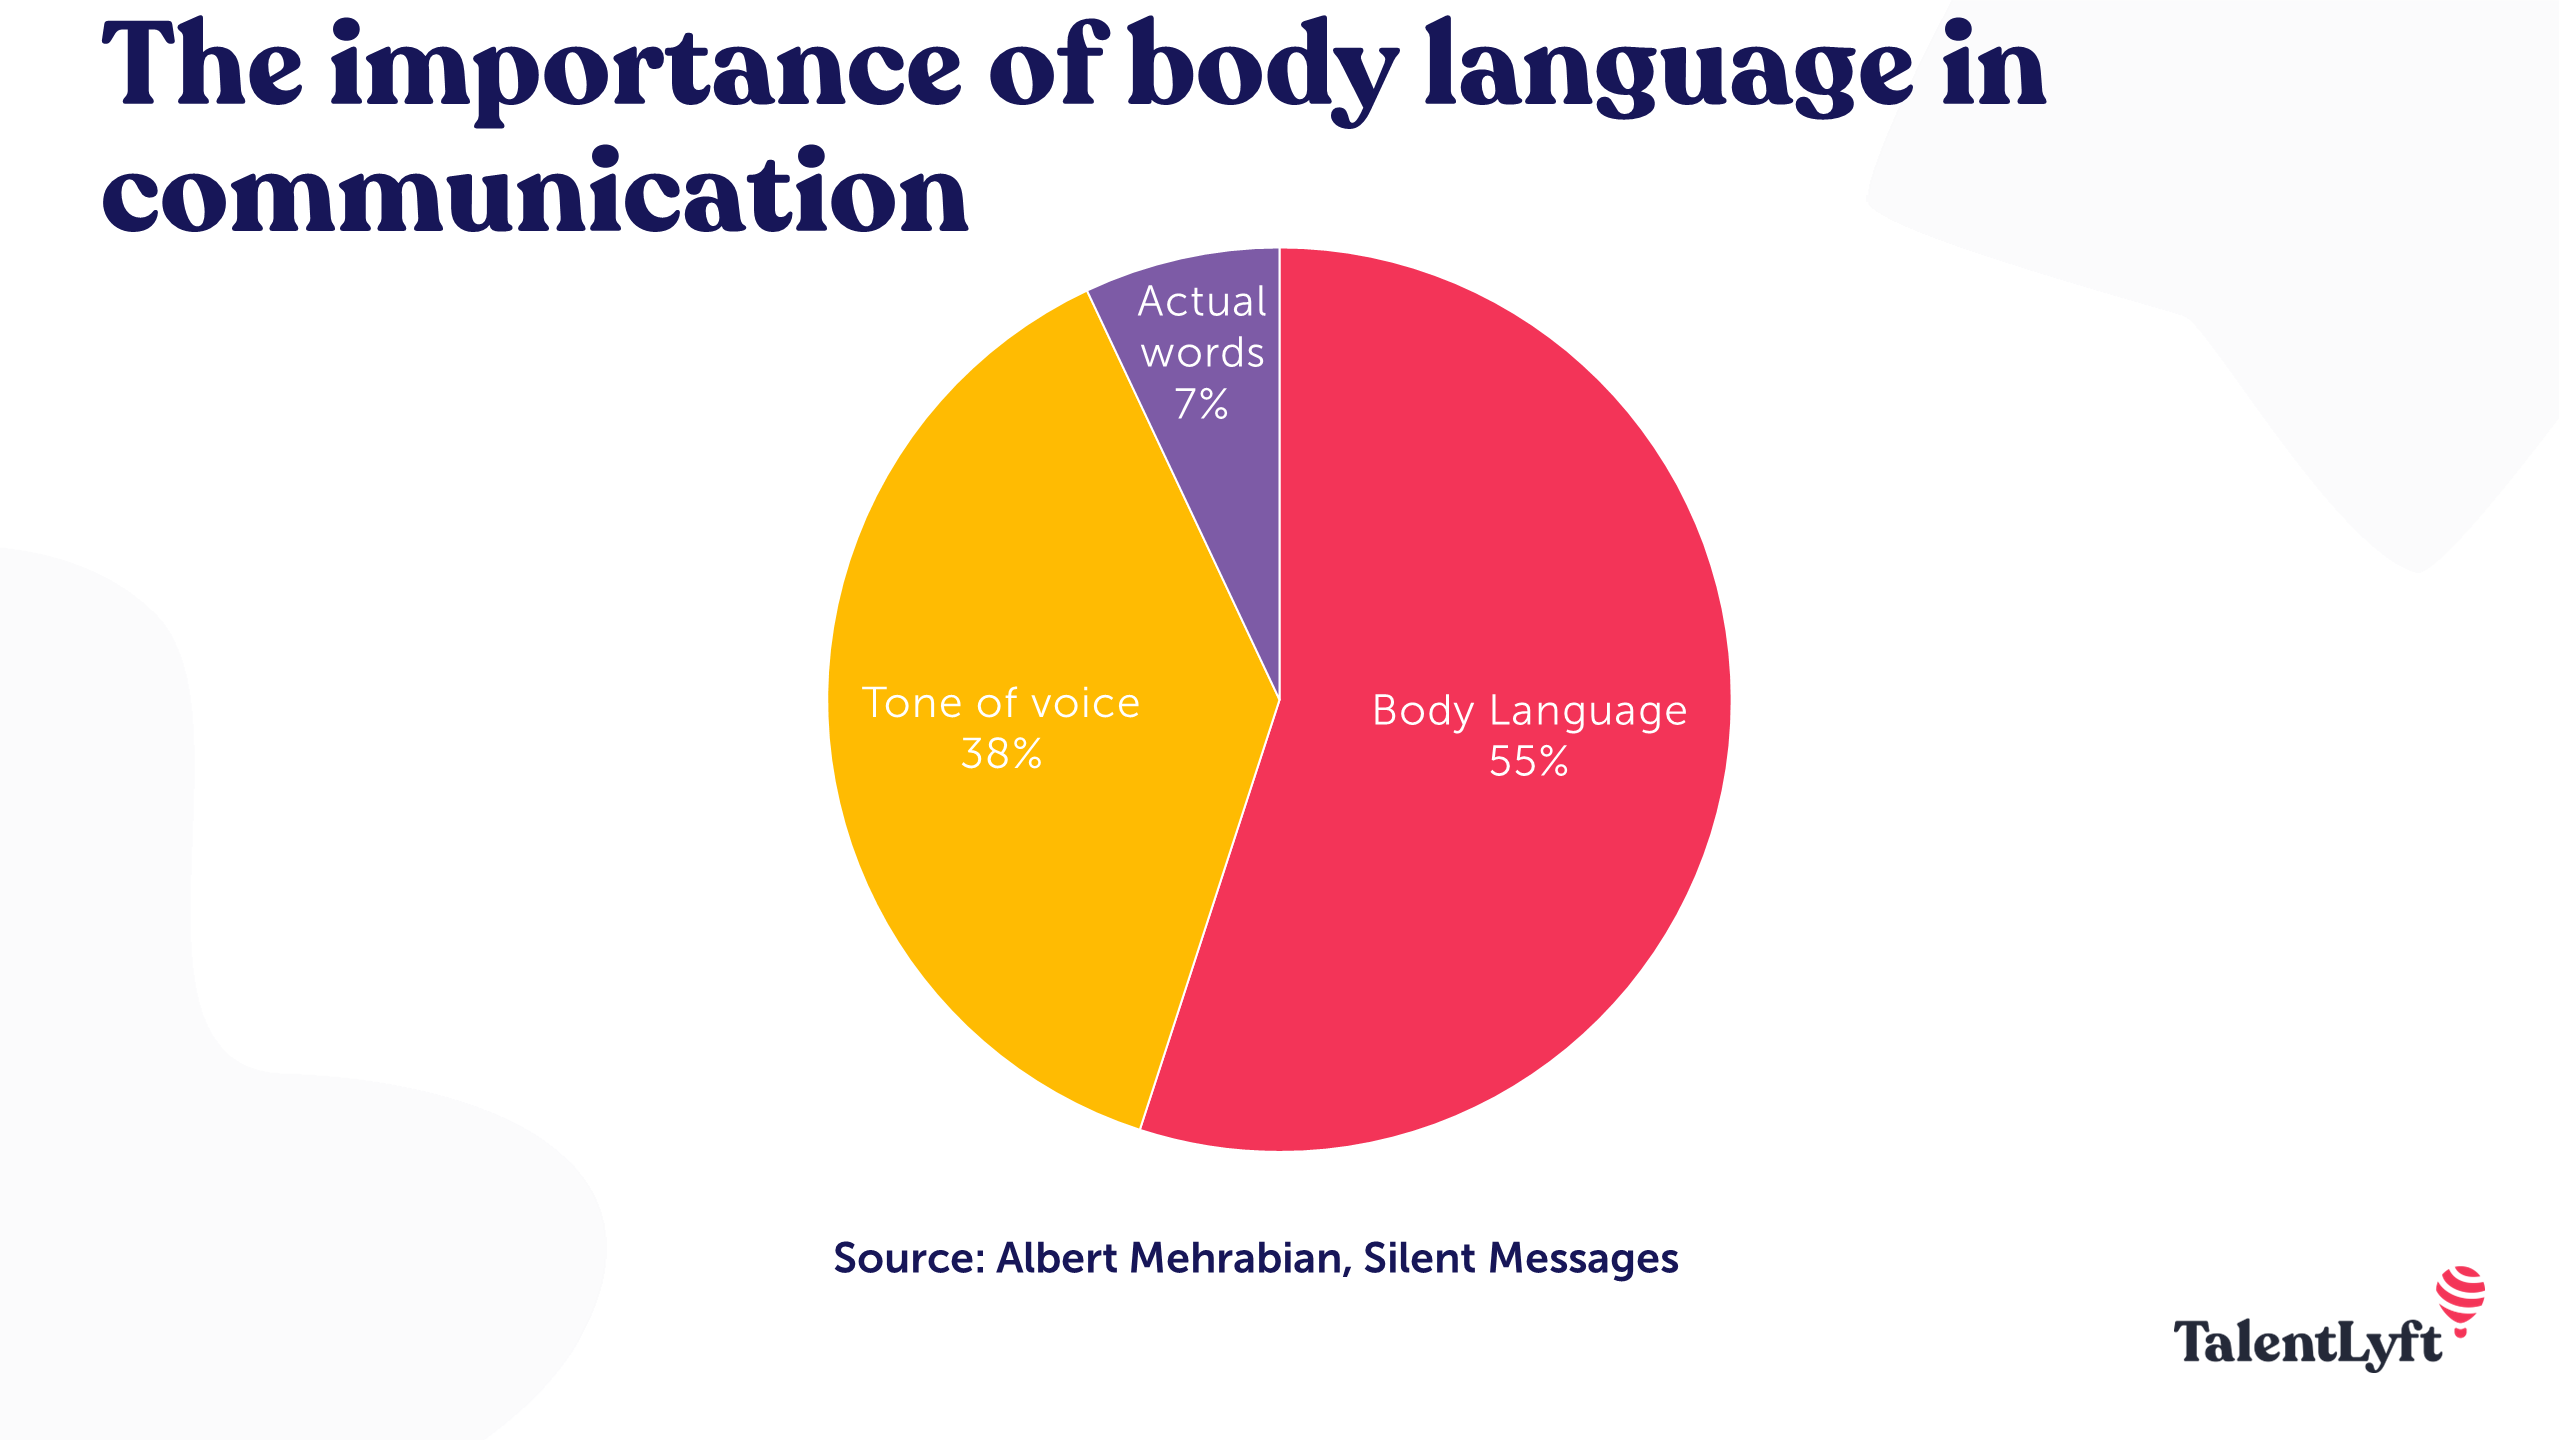 The importance of body language in communication